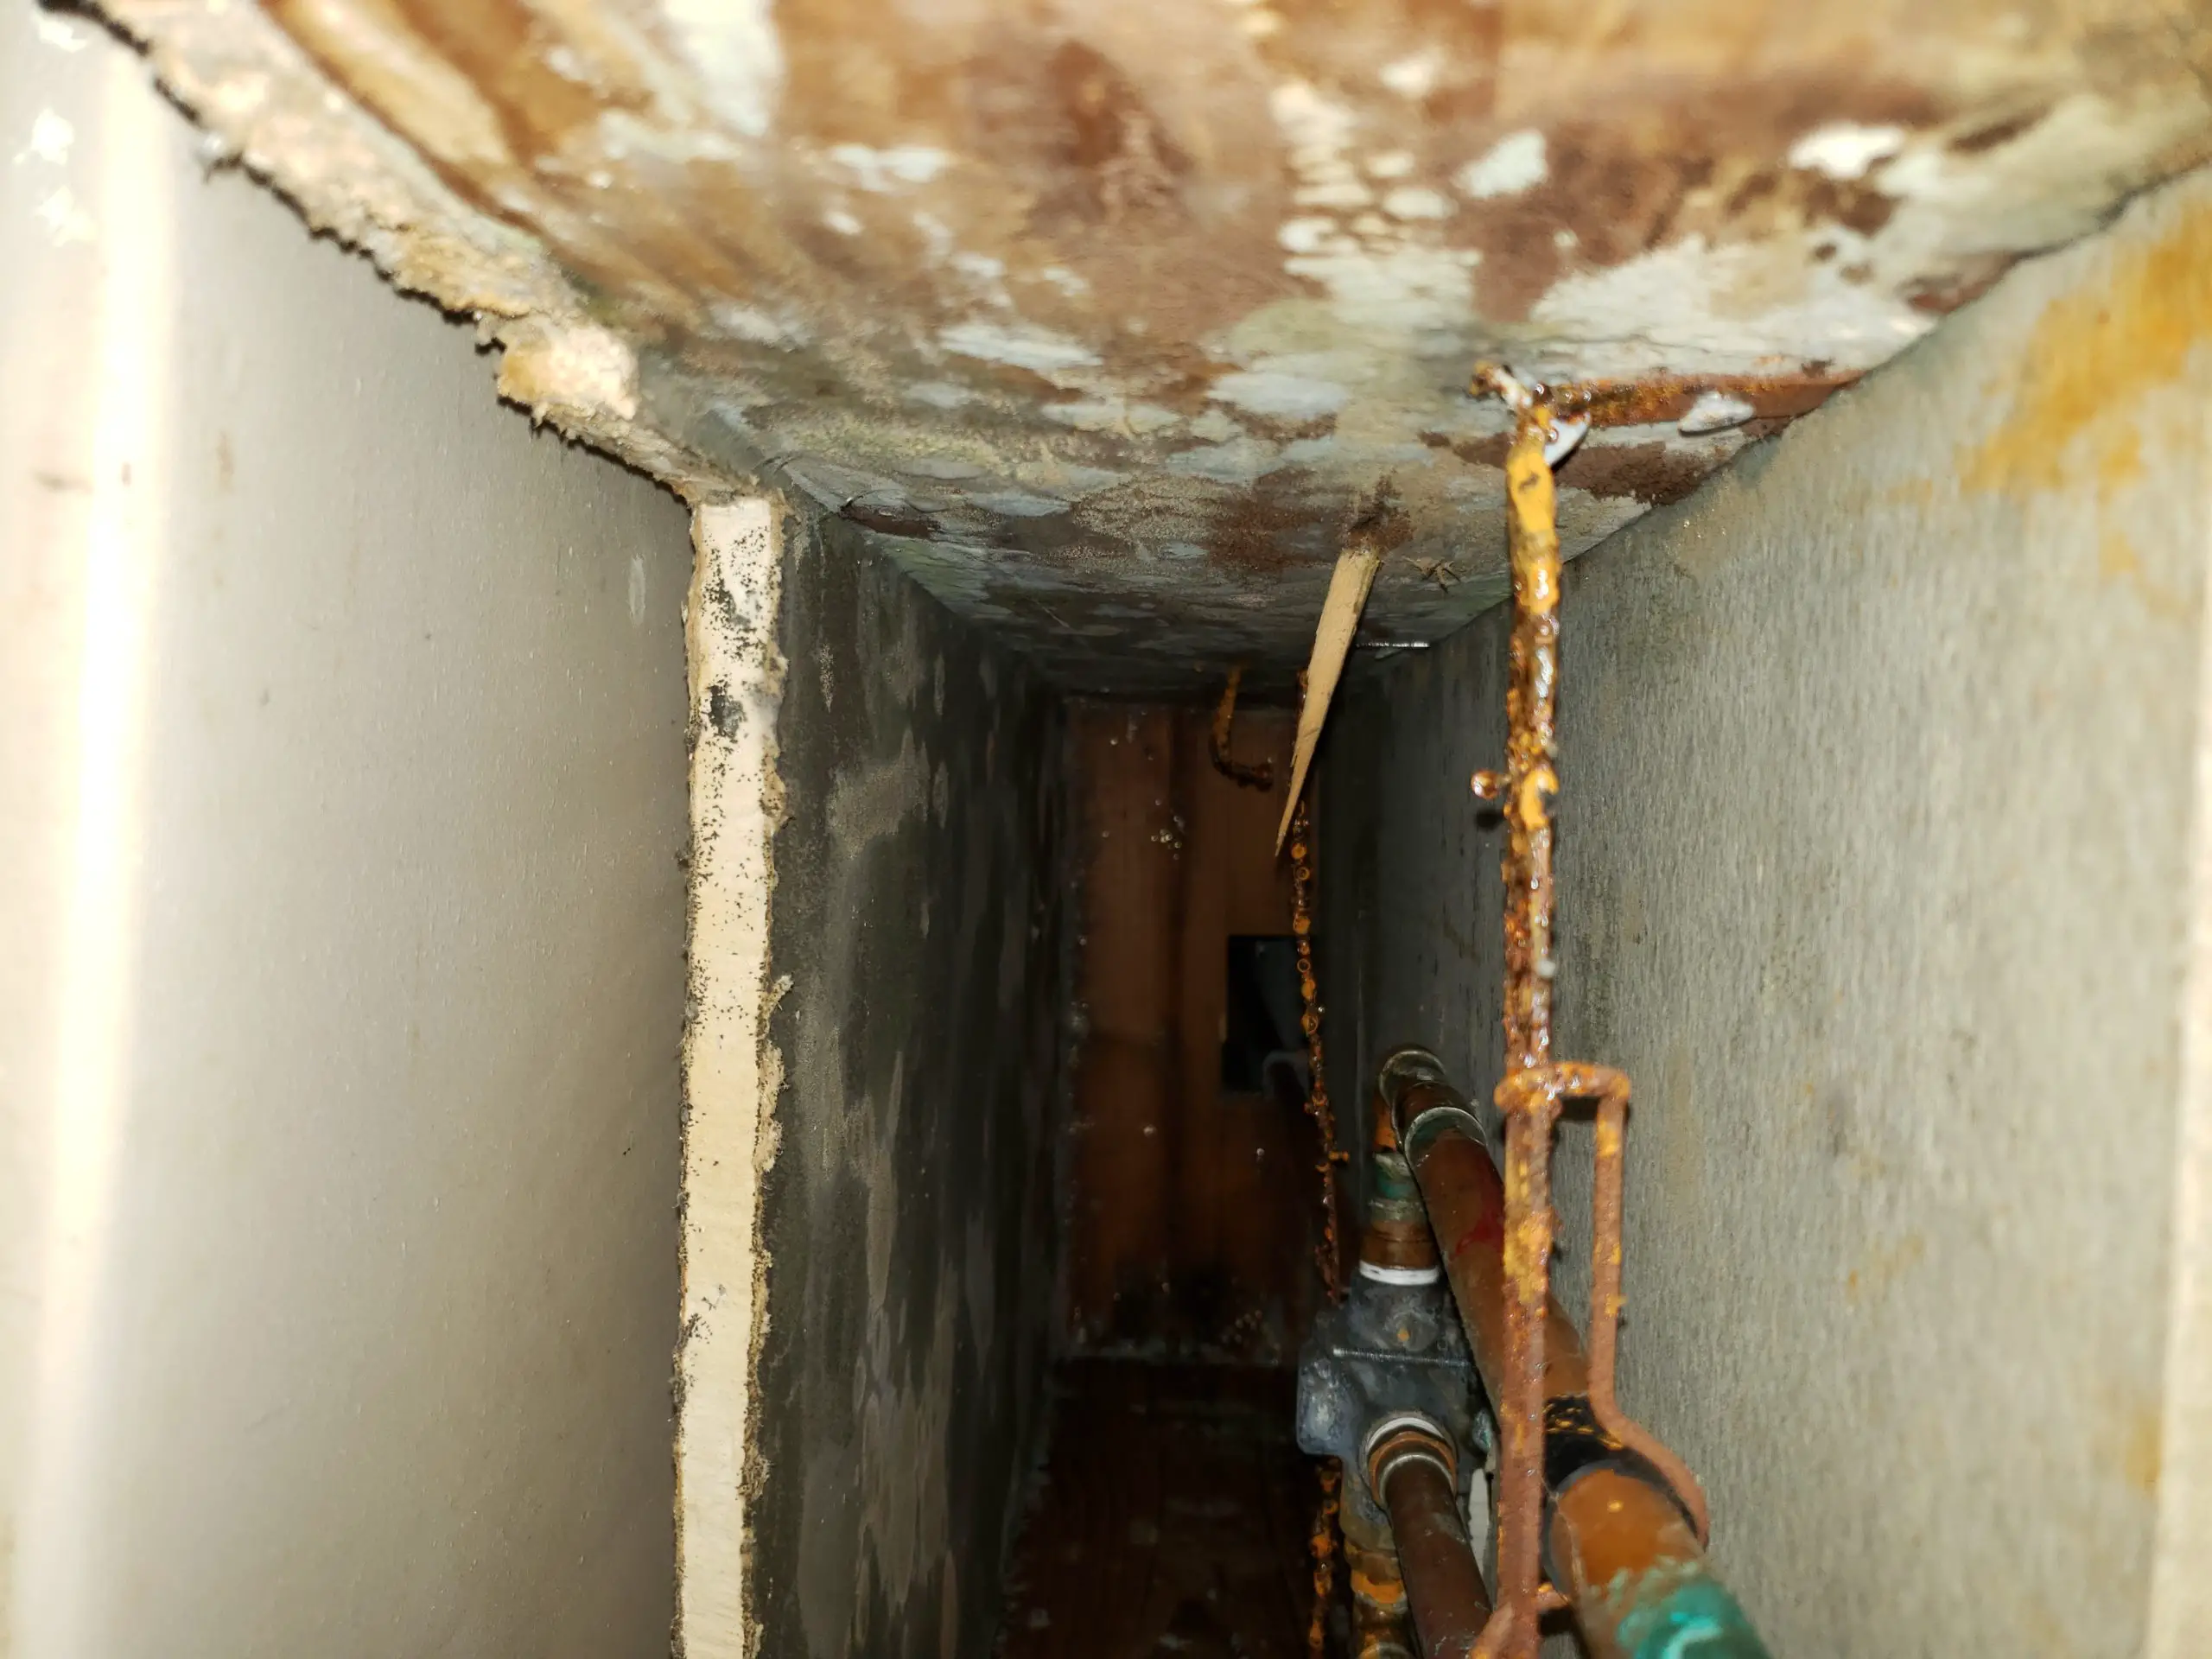 Black Mold Found During Home Inspection